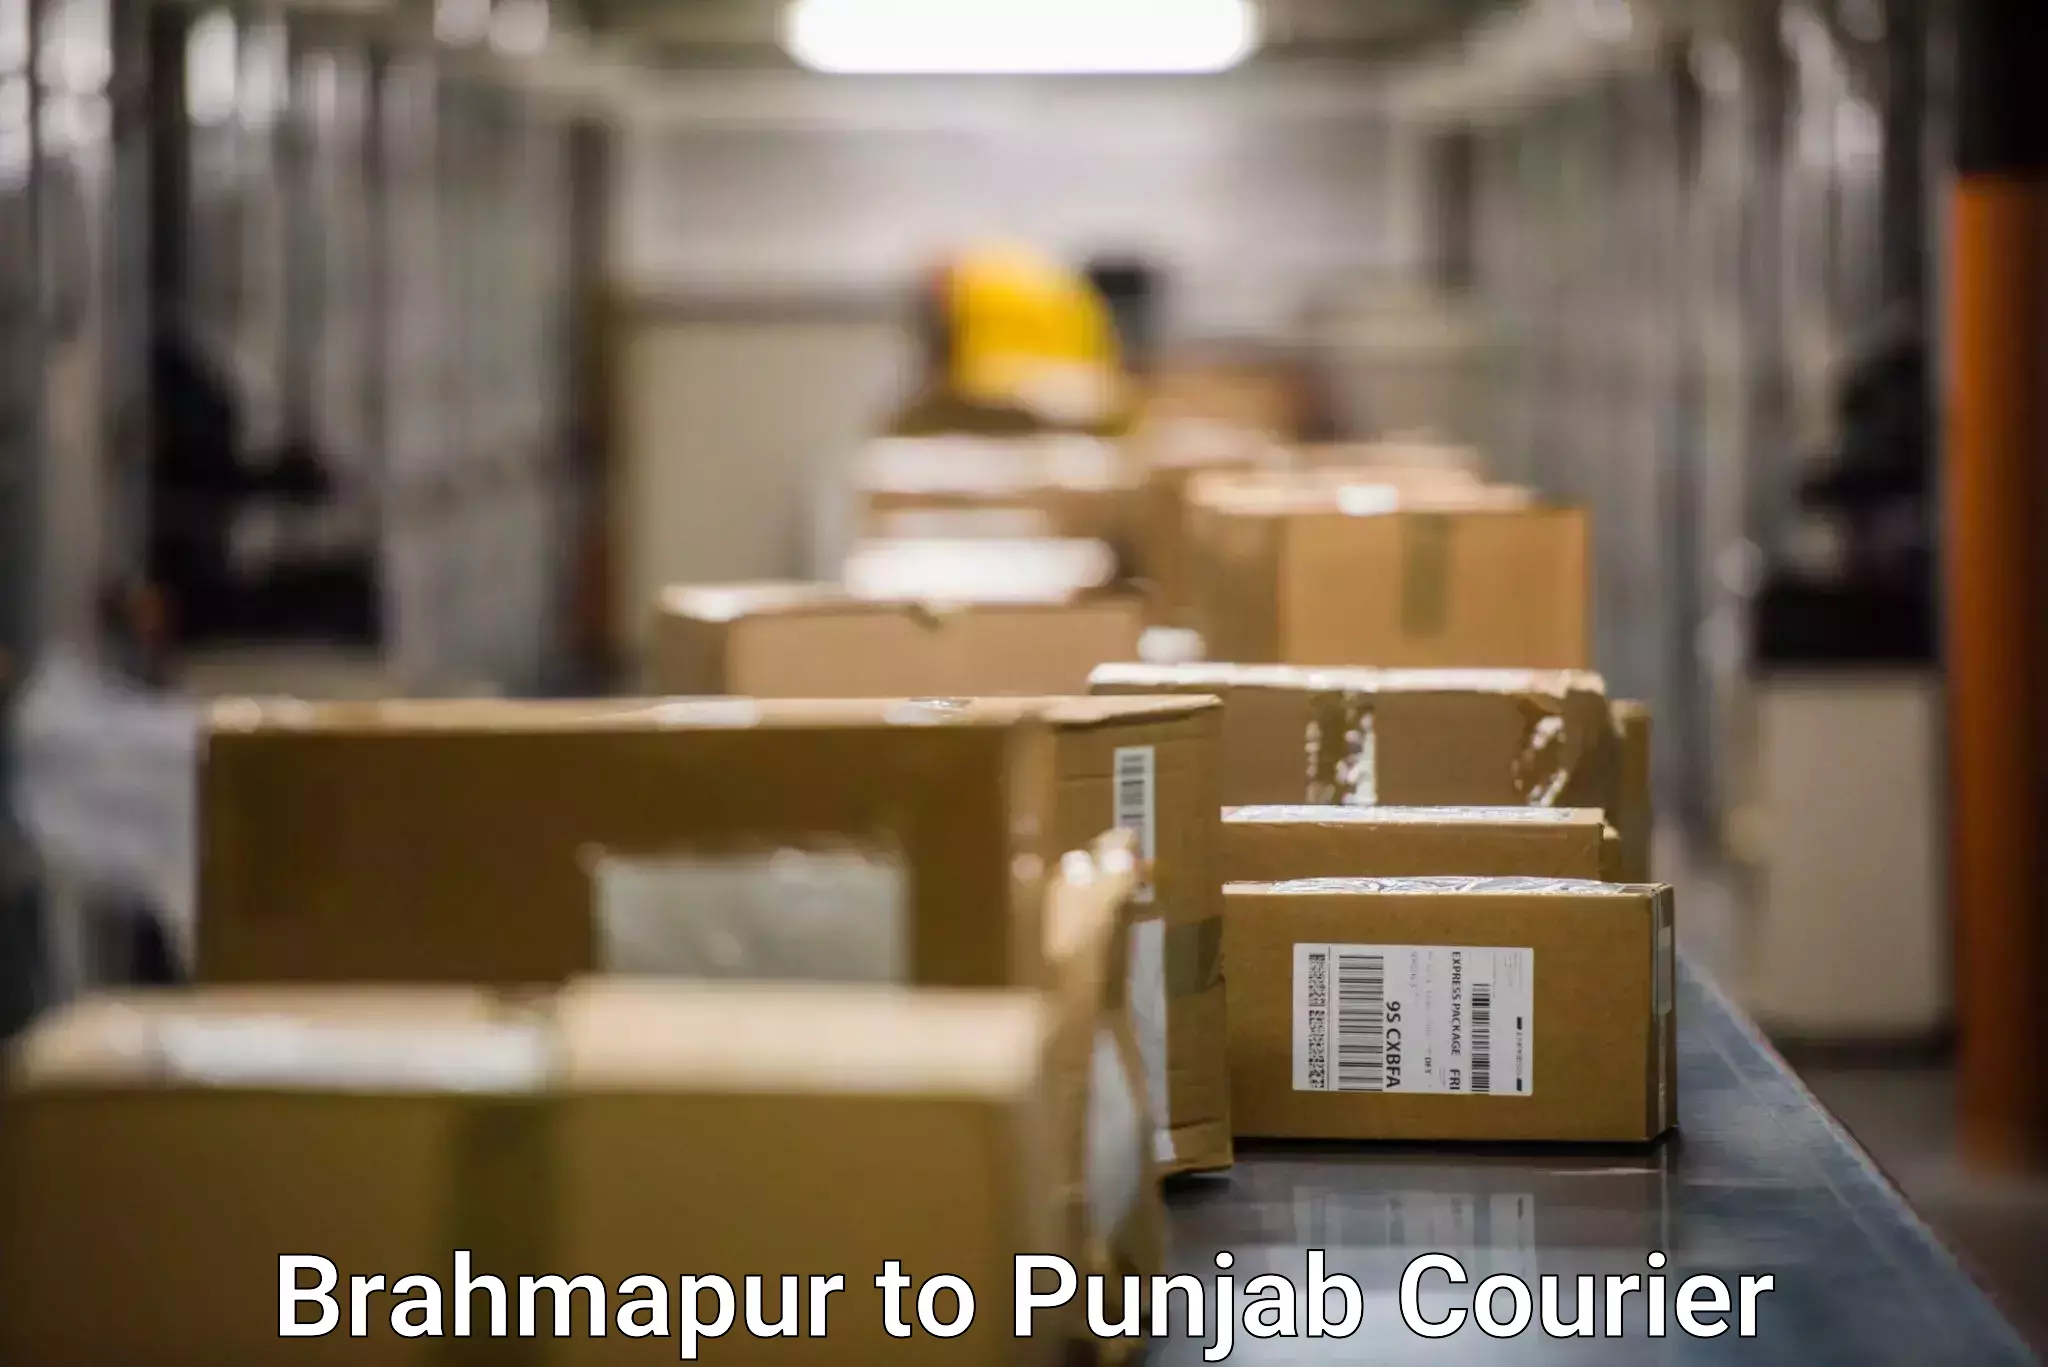 Flexible delivery schedules Brahmapur to Ludhiana